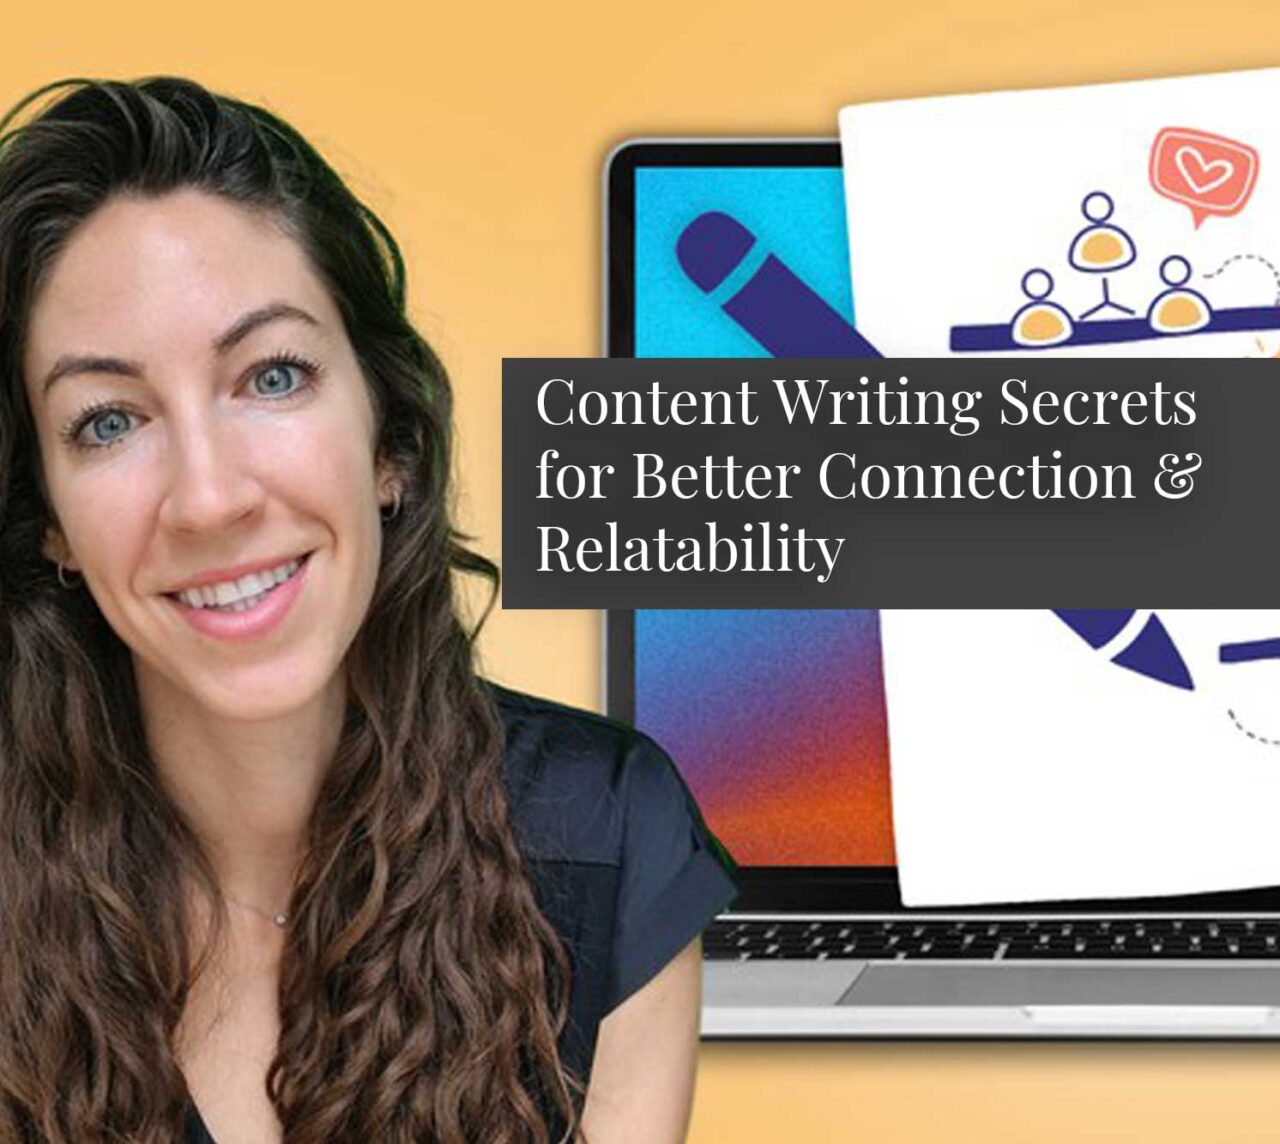 Content Writing Secrets for Better Connection & Relatability